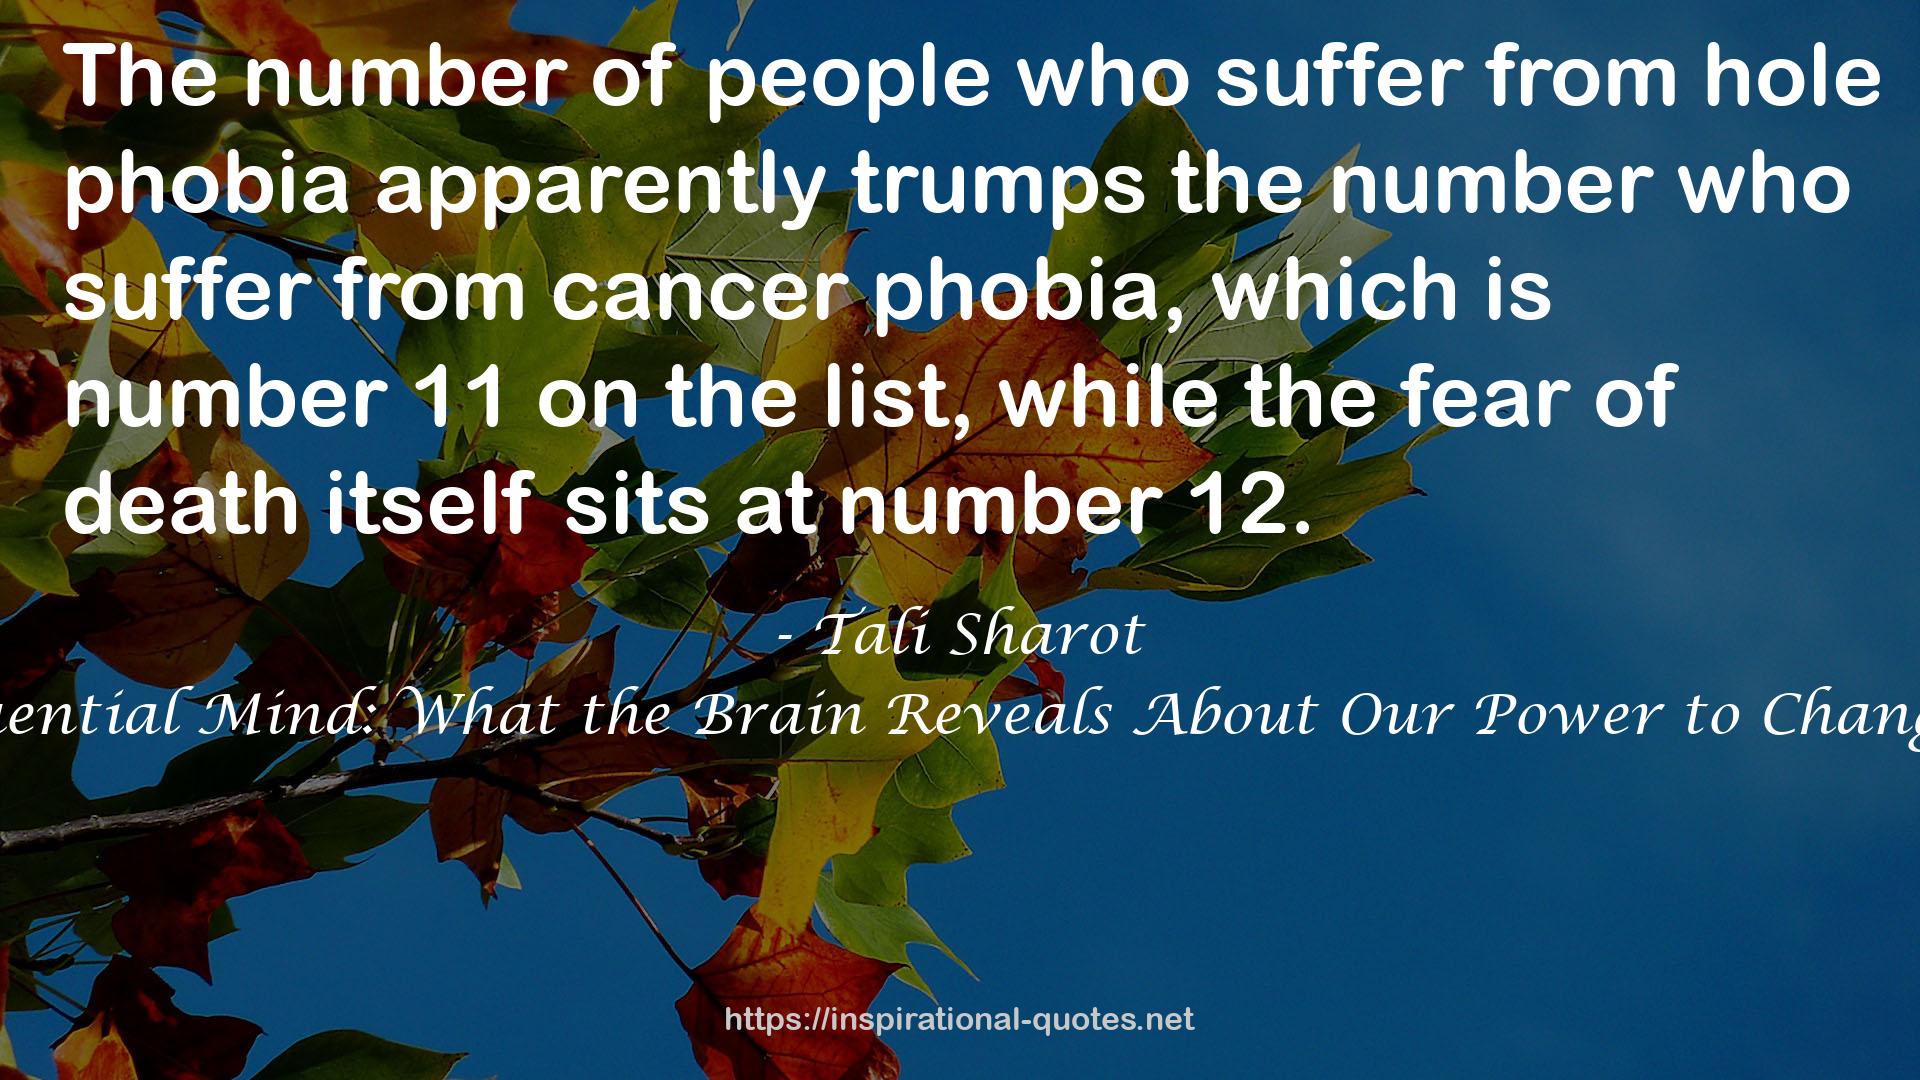 The Influential Mind: What the Brain Reveals About Our Power to Change Others QUOTES